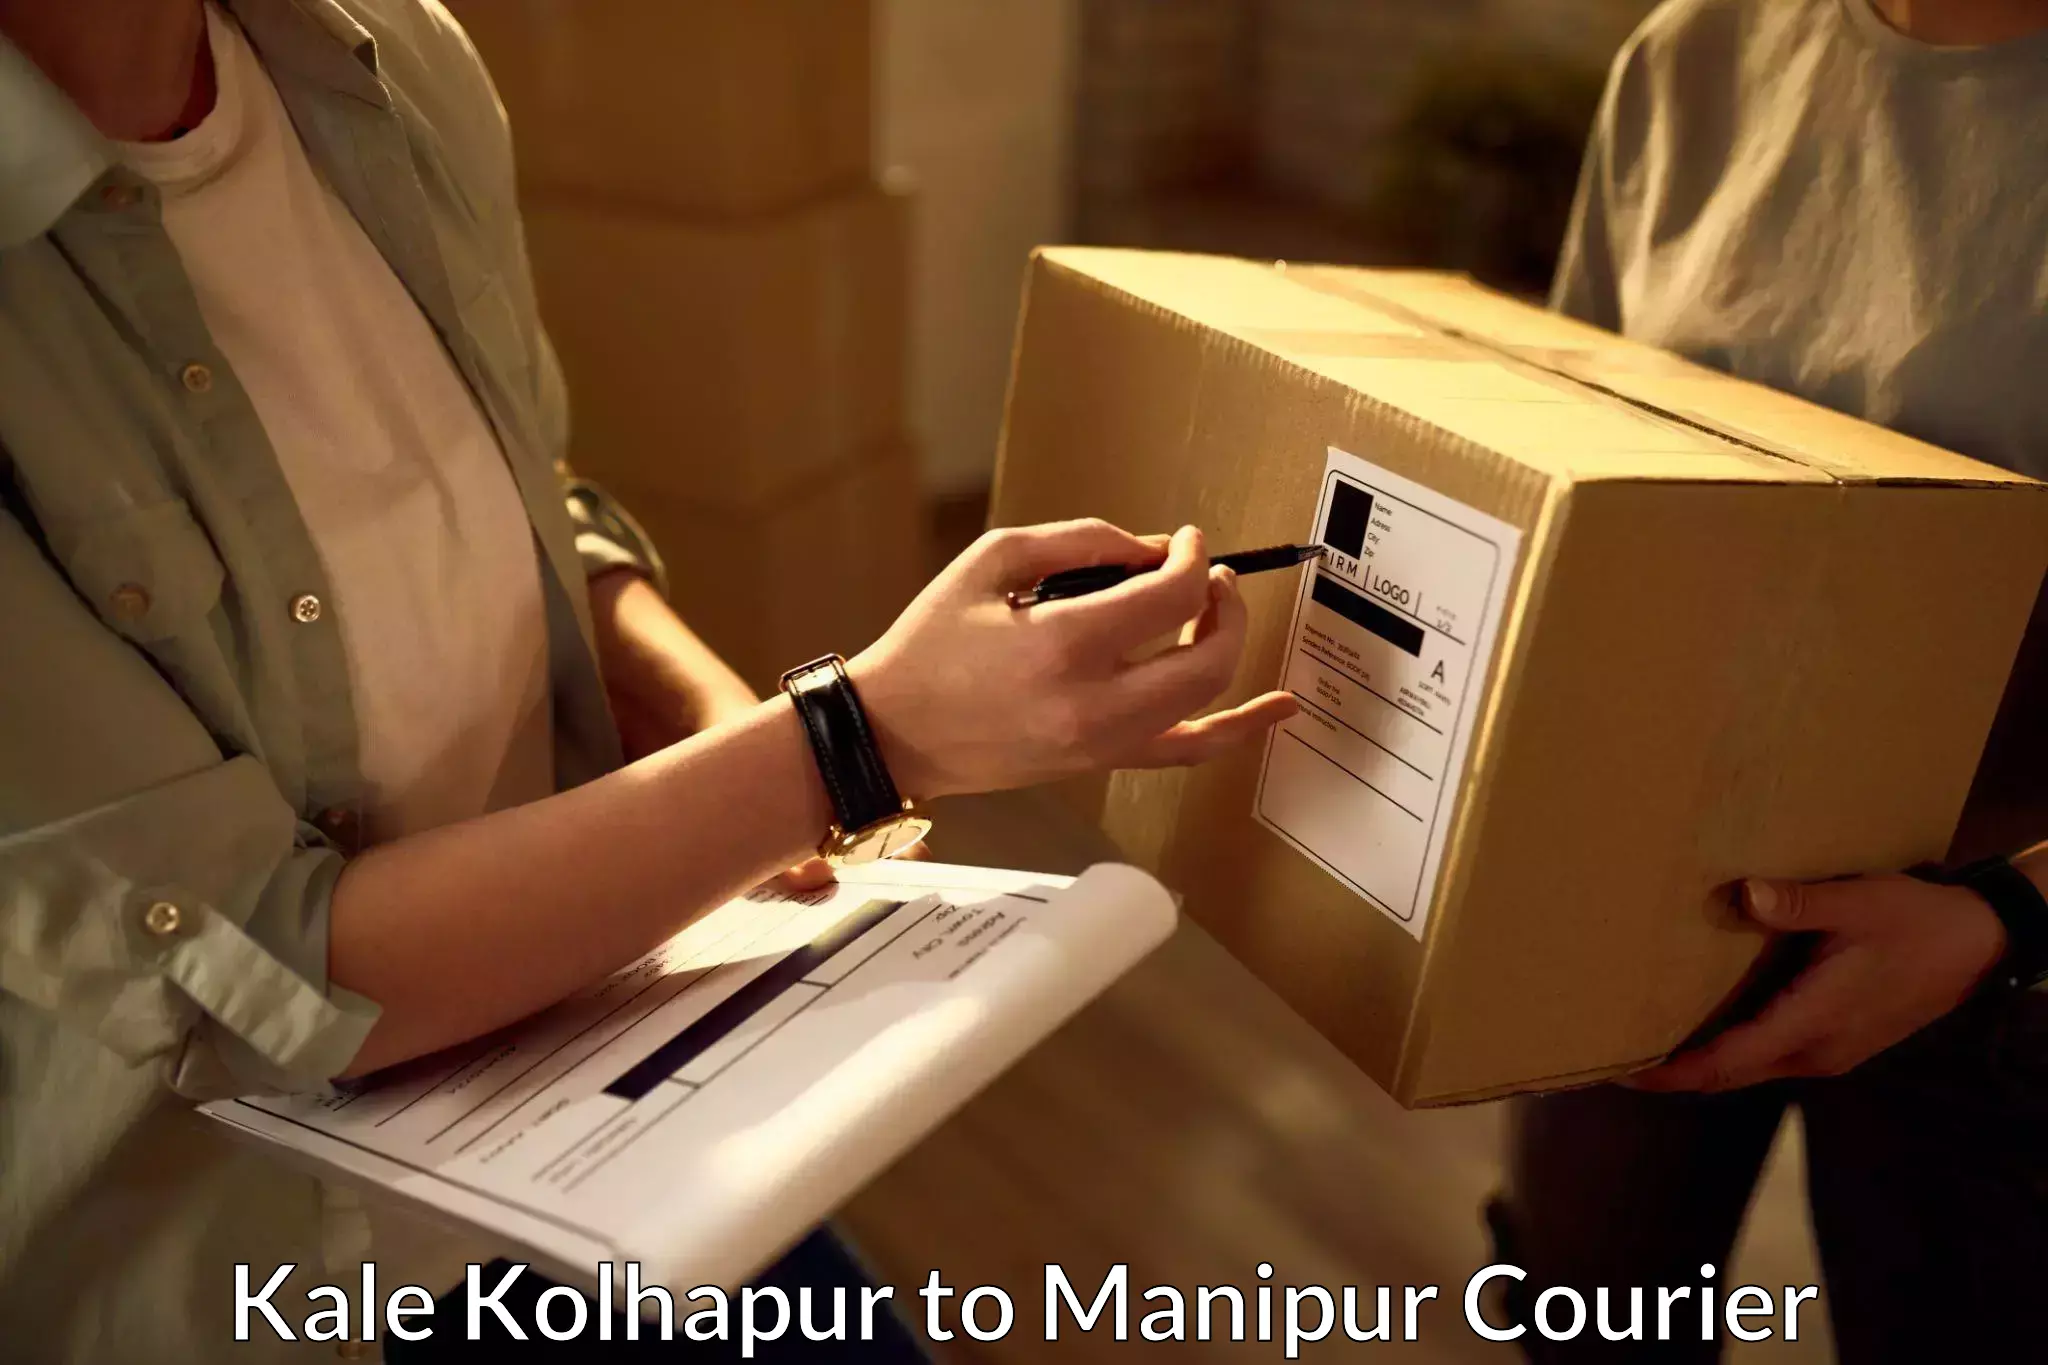 Domestic courier Kale Kolhapur to Manipur